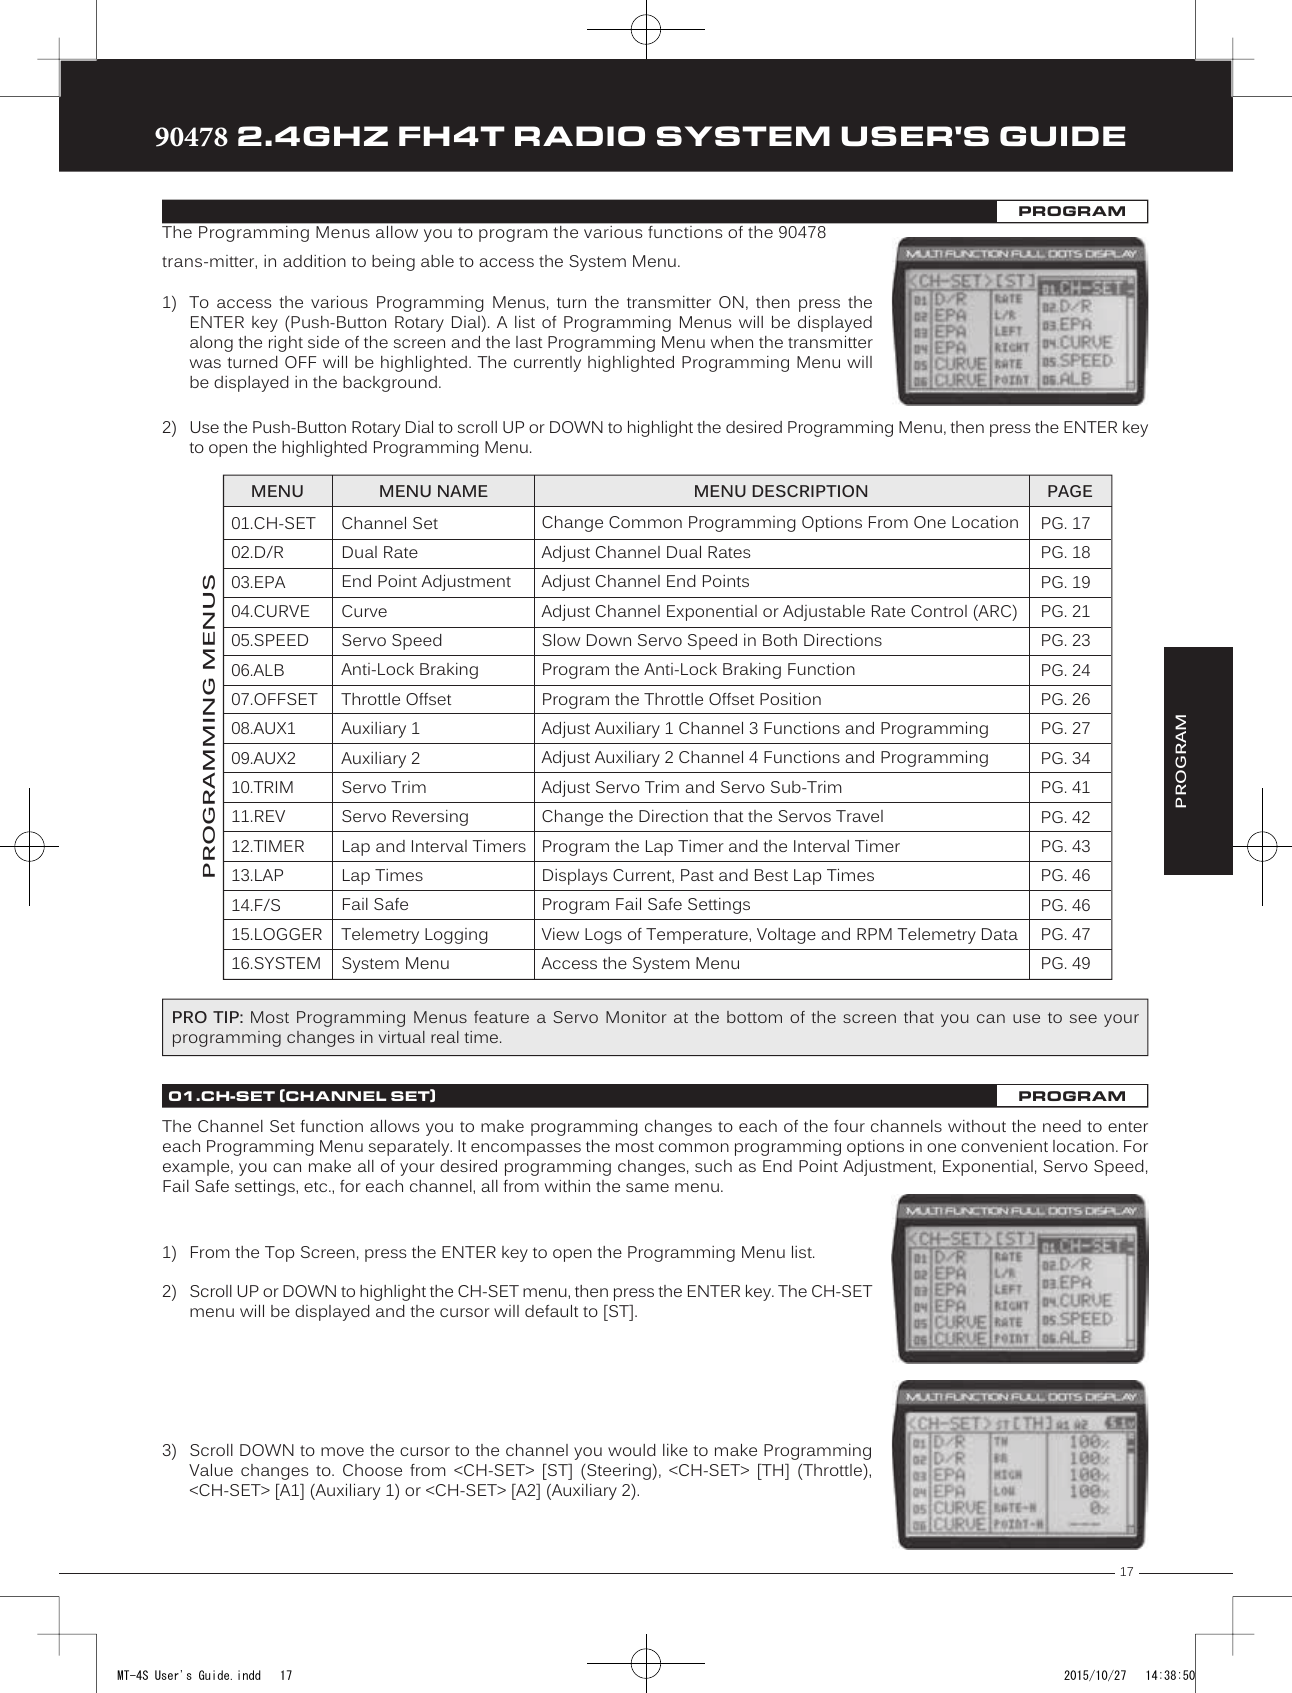 17TRTRTR90478 2.4GHZ FH4T RADIO SYSTEM USER&apos;S GUIDEPG. 17PG. 18PG. 19PG. 21PG. 23PG. 24PG. 26PG. 27PG. 34PG. 41PG. 42PG. 43PG. 46PG. 46PG. 47PG. 49The Channel Set function allows you to make programming changes to each of the four channels without the need to enter each Programming Menu separately. It encompasses the most common programming options in one convenient location. For   example, you can make all of your desired programming changes, such as End Point Adjustment, Exponential, Servo Speed, Fail Safe settings, etc., for each channel, all from within the same menu.PROGRAMMING MENUS OVERVIEWThe Programming Menus allow you to program the various functions of the 90478 trans-mitter, in addition to being able to access the System Menu. 1) To  access  the  various  Programming  Menus,  turn  the  transmitter  ON,  then  press  theENTER key  (Push-Button Rotary  Dial). A list  of Programming  Menus will  be displayedalong the right side of the screen and the last Programming Menu when the transmitterwas turned OFF will be highlighted. The currently highlighted Programming Menu willbe displayed in the background.1) From the Top Screen, press the ENTER key to open the Programming Menu list.2) Scroll UP or DOWN to highlight the CH-SET menu, then press the ENTER key. The CH-SETmenu will be displayed and the cursor will default to [ST].01.CH-SET02.D/R03.EPA04.CURVE05.SPEED06.ALB07.OFFSET08.AUX109.AUX210.TRIM11.REV12.TIMER13.LAP14.F/S15.LOGGER16.SYSTEMChannel SetDual RateEnd Point AdjustmentCurveServo SpeedAnti-Lock BrakingThrottle OffsetAuxiliary 1Auxiliary 2Servo TrimServo ReversingLap and Interval TimersLap TimesFail SafeTelemetry LoggingSystem MenuChange Common Programming Options From One LocationAdjust Channel Dual RatesAdjust Channel End PointsAdjust Channel Exponential or Adjustable Rate Control (ARC)Slow Down Servo Speed in Both DirectionsProgram the Anti-Lock Braking FunctionProgram the Throttle Offset PositionAdjust Auxiliary 1 Channel 3 Functions and ProgrammingAdjust Auxiliary 2 Channel 4 Functions and ProgrammingAdjust Servo Trim and Servo Sub-TrimChange the Direction that the Servos TravelProgram the Lap Timer and the Interval TimerDisplays Current, Past and Best Lap TimesProgram Fail Safe SettingsView Logs of Temperature, Voltage and RPM Telemetry DataAccess the System MenuMENU MENU NAME MENU DESCRIPTIONPROGRAMMING MENUSPAGE3) Scroll DOWN to move the cursor to the channel you would like to make ProgrammingValue  changes  to.  Choose  from  &lt;CH-SET&gt;  [ST]  (Steering),  &lt;CH-SET&gt;  [TH]  (Throttle),&lt;CH-SET&gt; [A1] (Auxiliary 1) or &lt;CH-SET&gt; [A2] (Auxiliary 2).PROGRAMPROGRAM01.CH-SET (CHANNEL SET)PROGRAM2) Use the Push-Button Rotary Dial to scroll UP or DOWN to highlight the desired Programming Menu, then press the ENTER keyto open the highlighted Programming Menu.PRO TIP: Most Programming Menus feature a Servo Monitor at the bottom of the screen that you can use to see your programming changes in virtual real time.MT-4S User&apos;s Guide.indd   17 2015/10/27   14:38:50